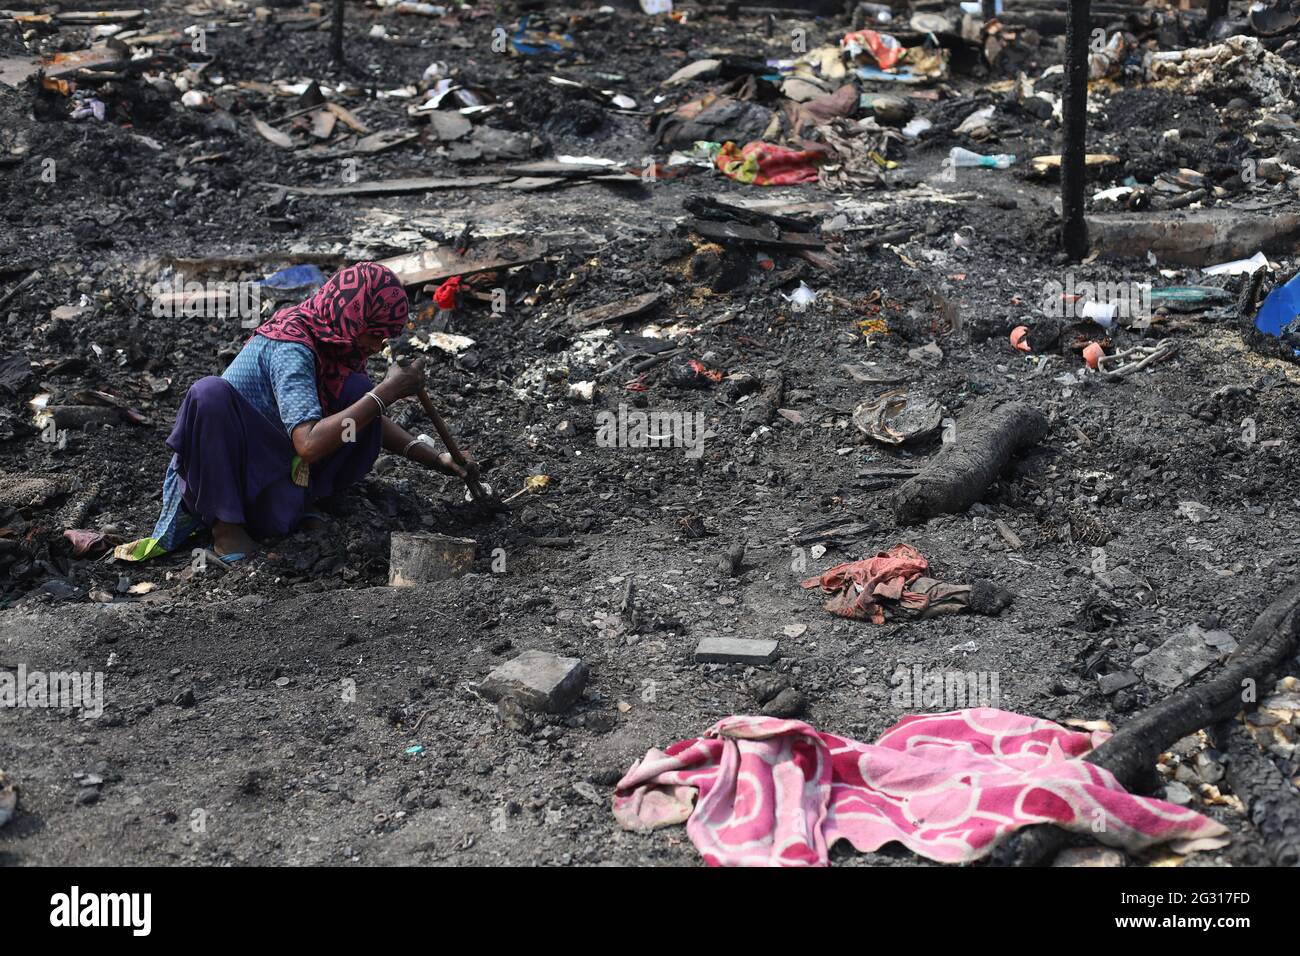 New Delhi, India. 13th June, 2021. A woman looks in the charred remains of their camp, during the aftermath.A fire incident broke out at the Rohingya refugee camp leaving over 50 shanties of Rohingya refugees gutted. The cause of the fire has not yet been established. (Photo by Amarjeet Kumar Singh/SOPA Imag/Sipa USA) Credit: Sipa USA/Alamy Live News Stock Photo